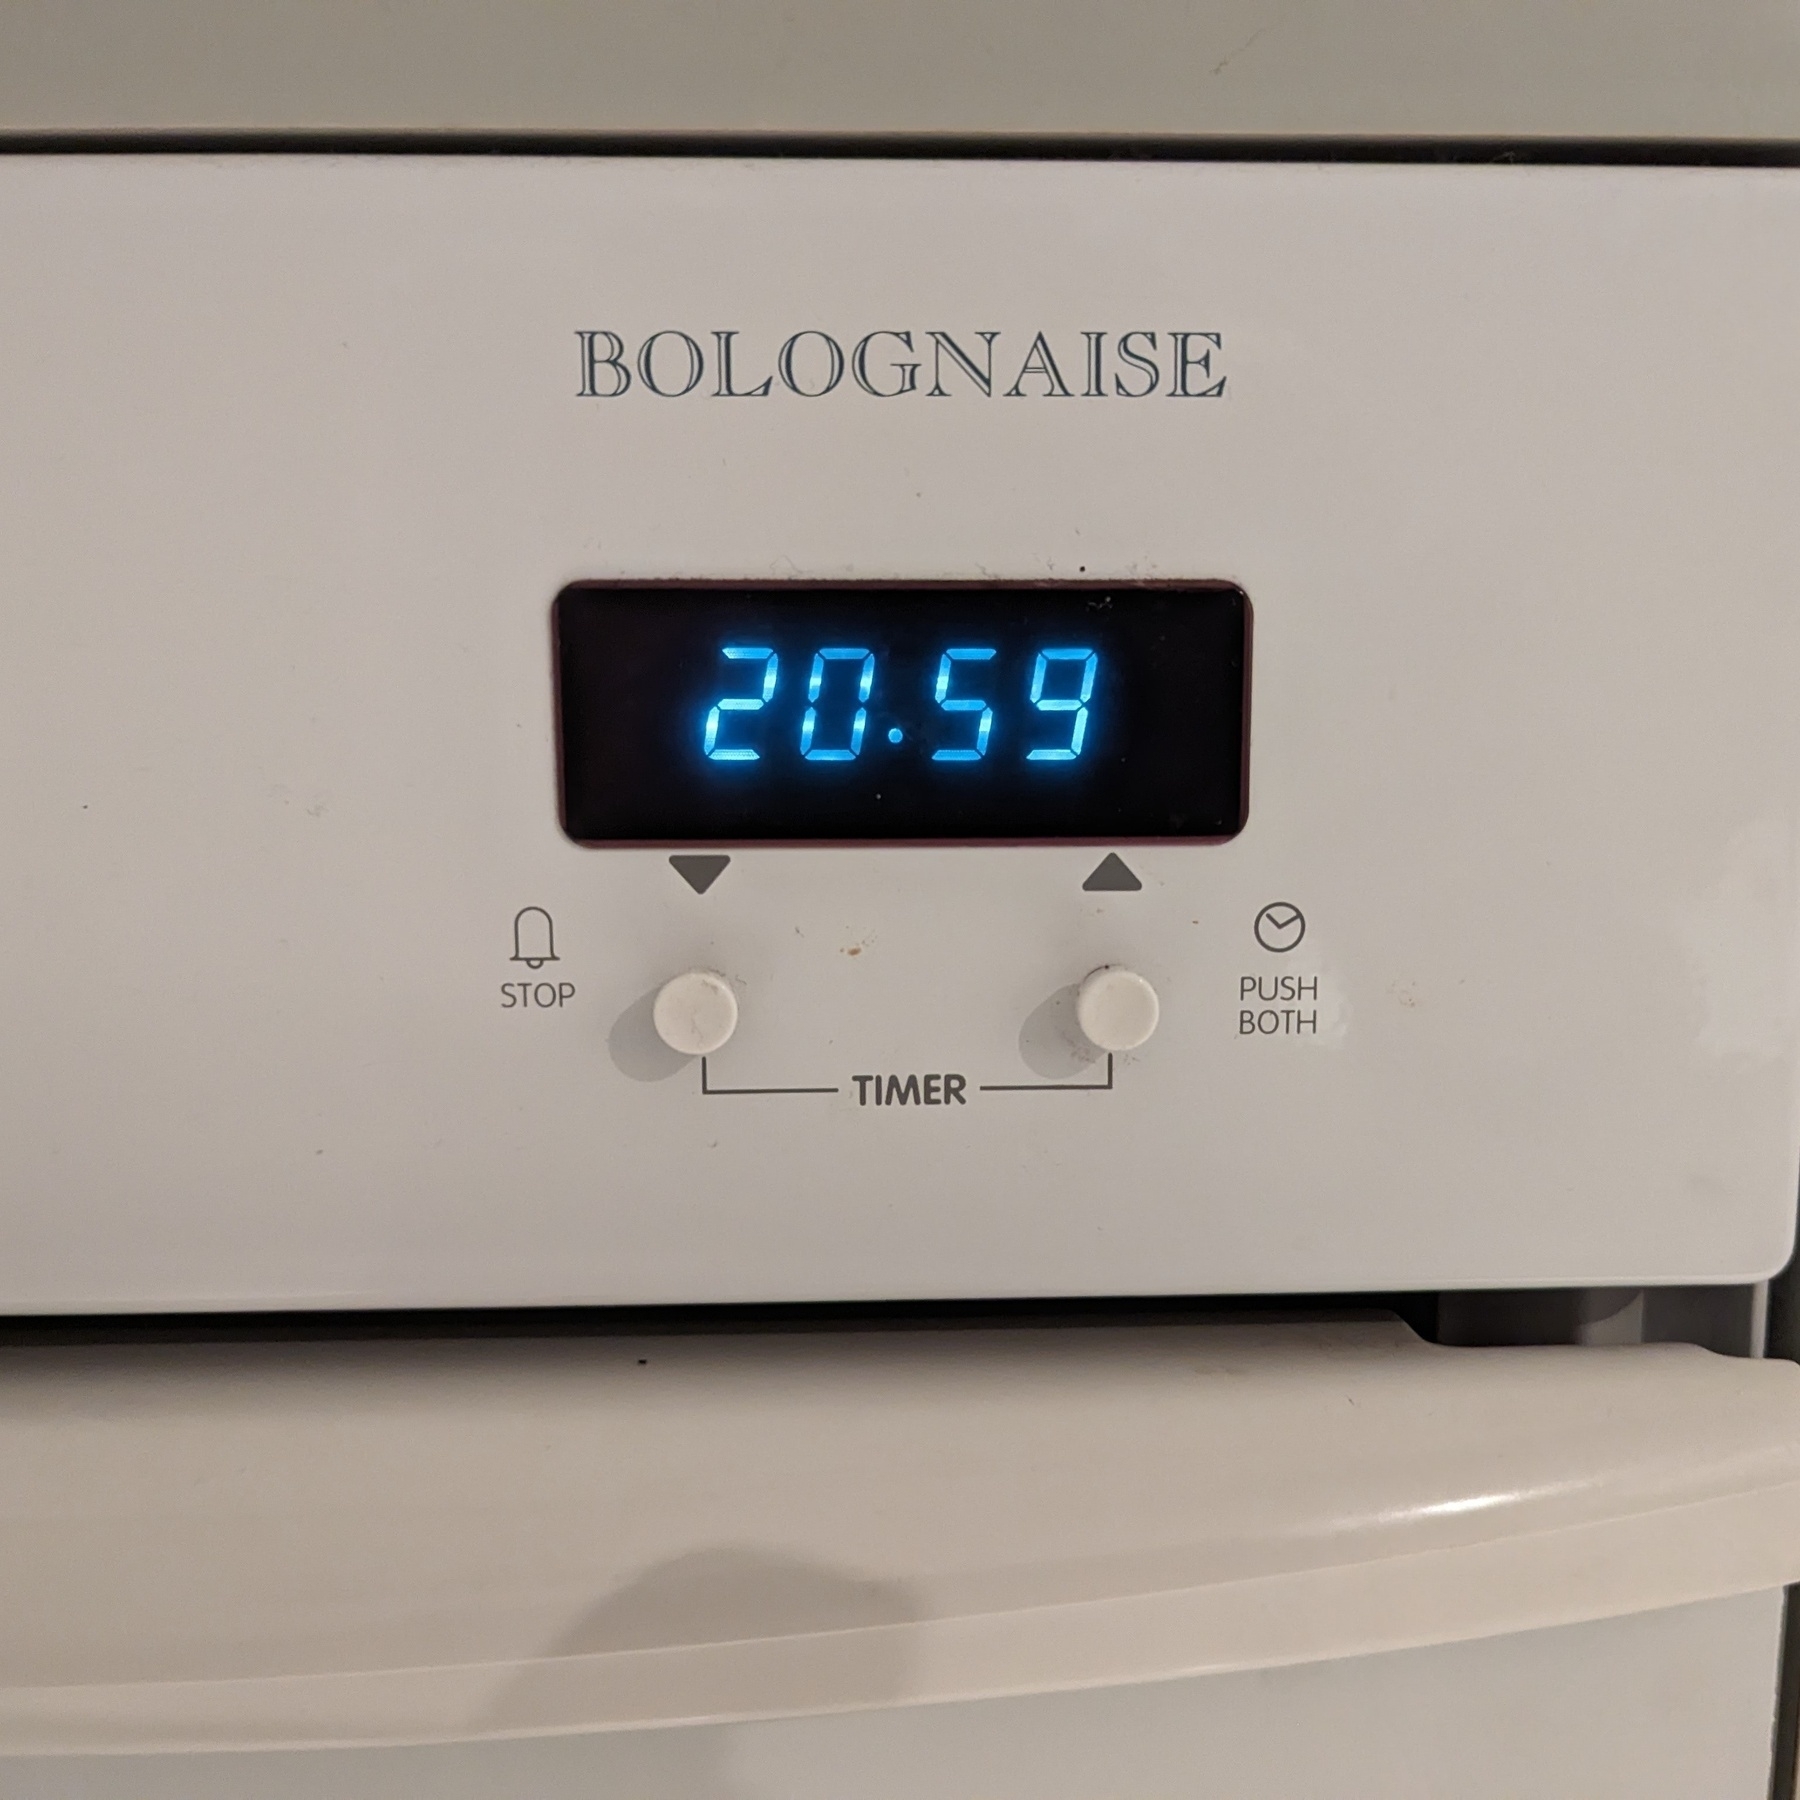 A digital oven clock that reads 20:59.